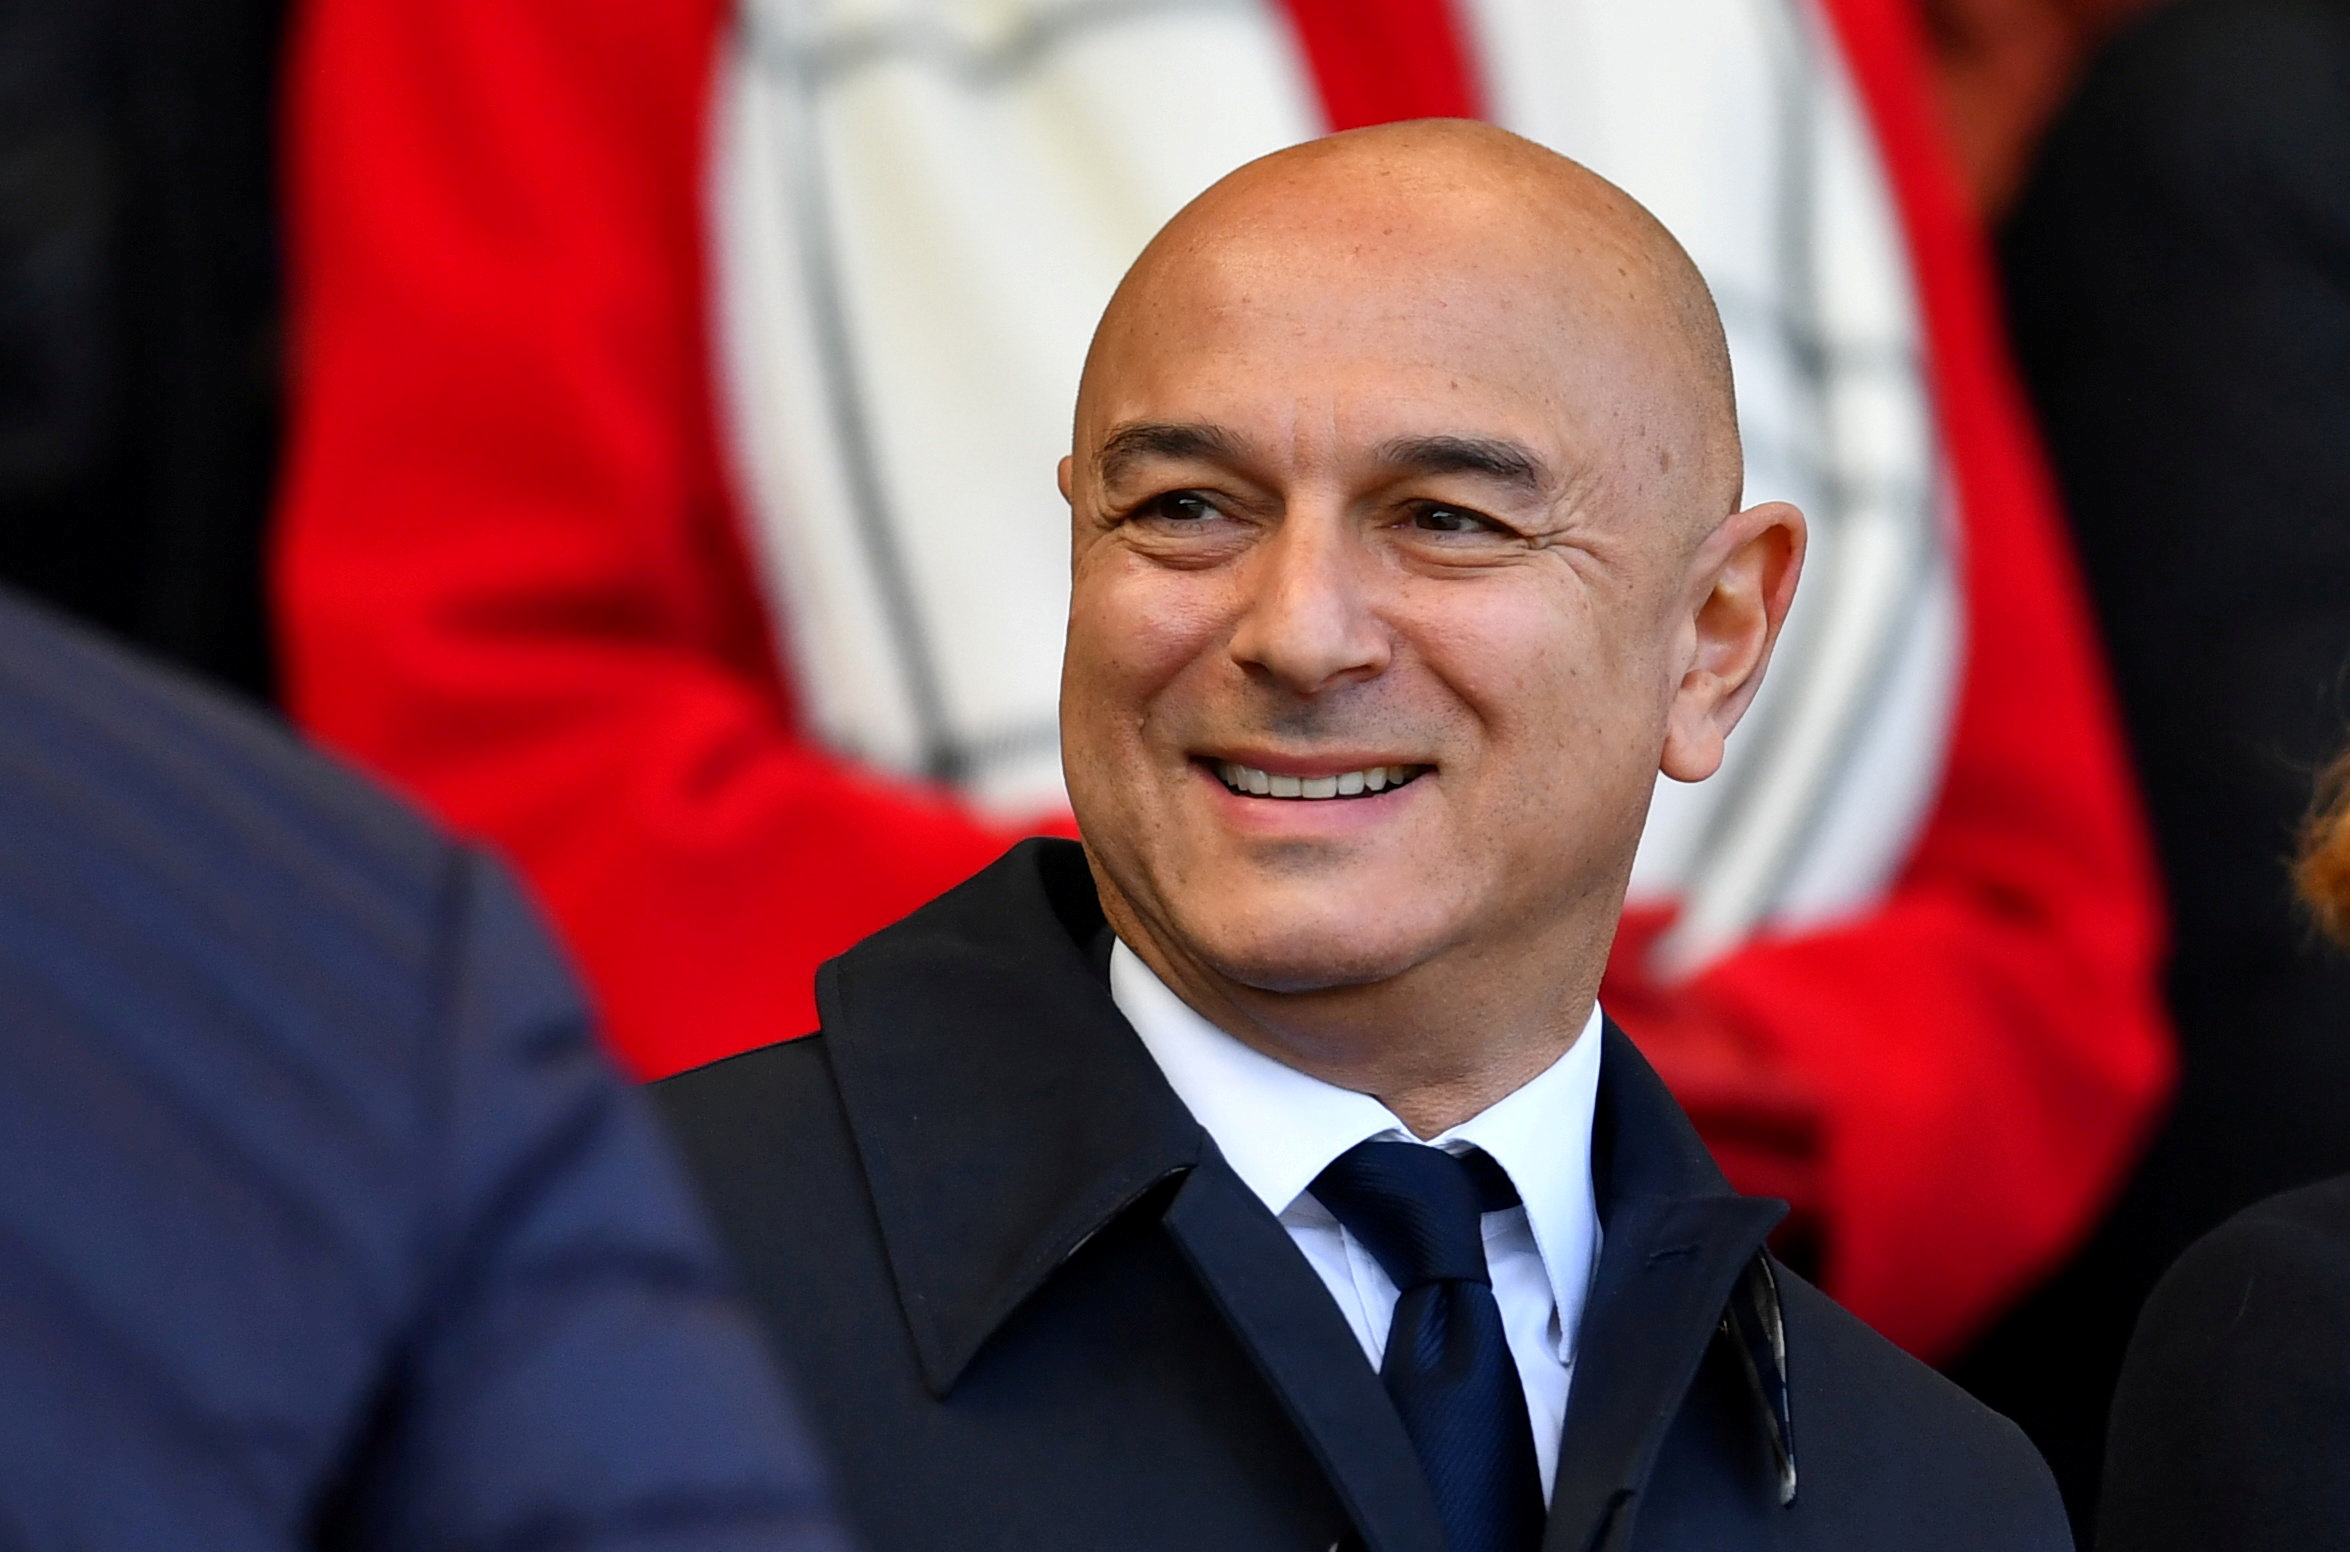 Spurs chairman Levy elected to ECA executive board | Reuters